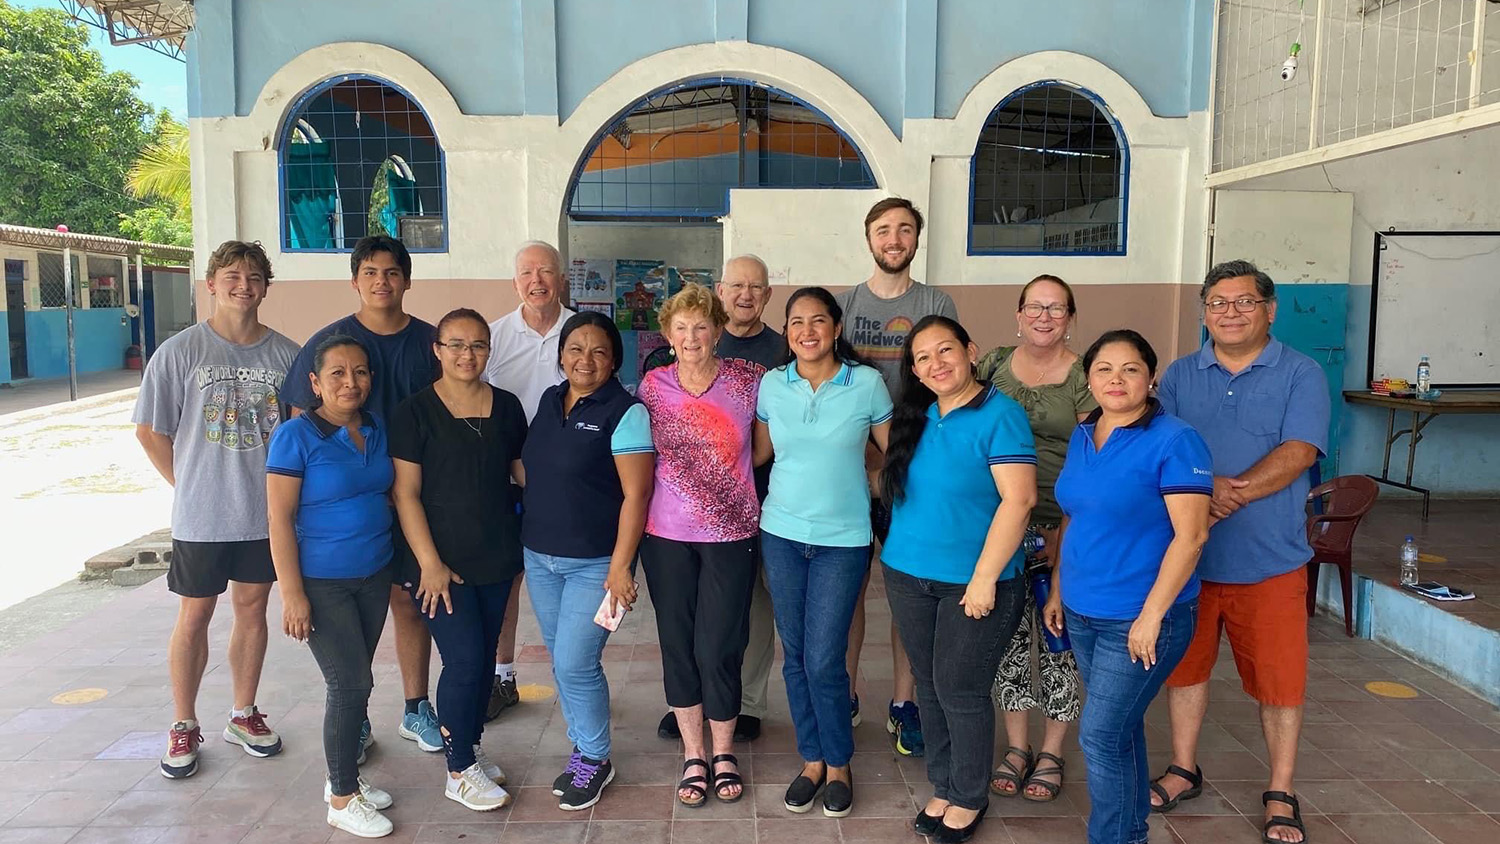 NC State third-year student Jack Rothacker (back row, left) visited El Salvador on a mission trip this summer.